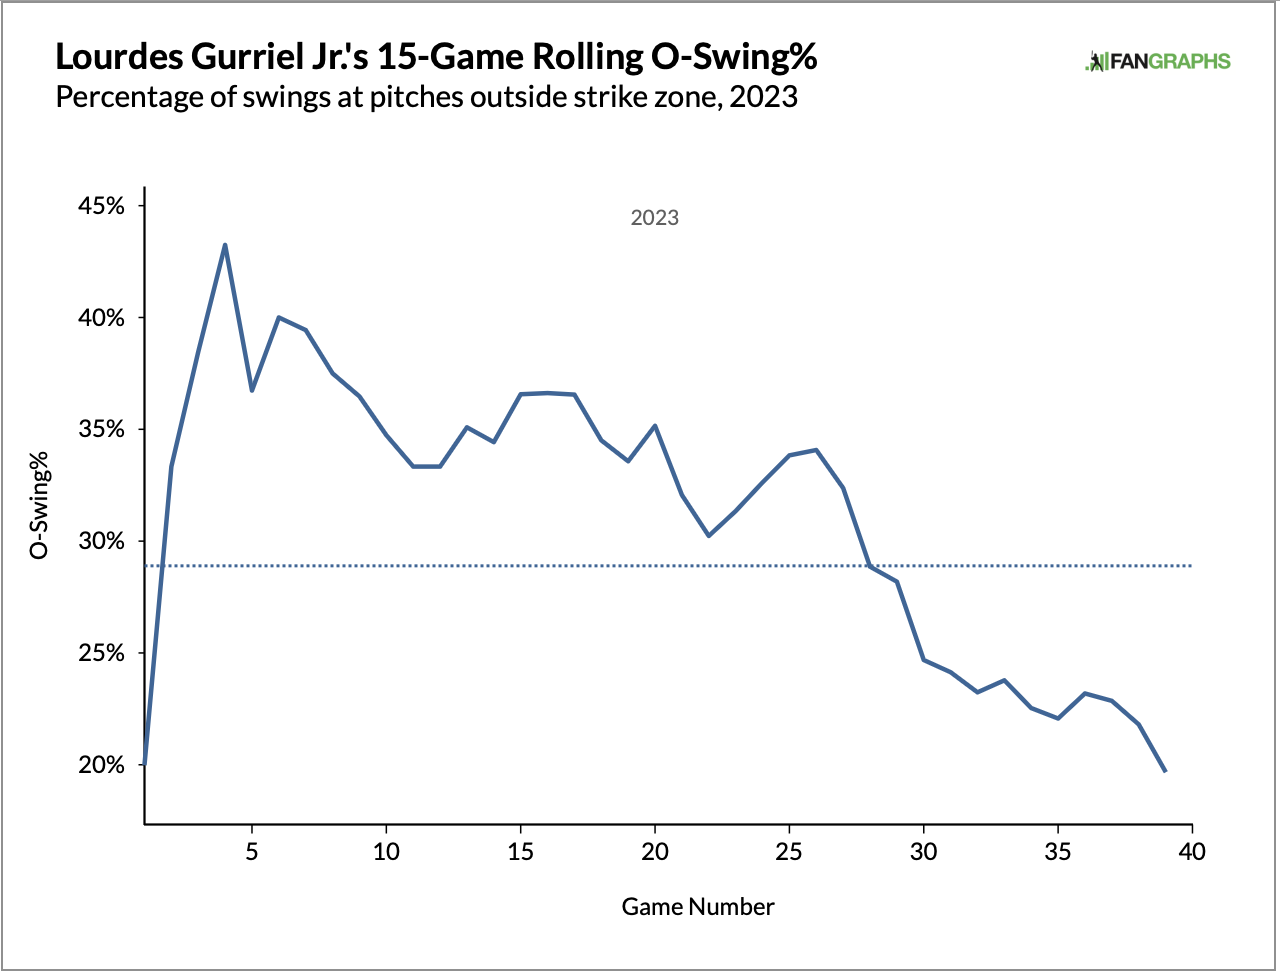 Fifteen-game rolling chase rate for Diamondbacks outfielder Lourdes Gurriel, 2023